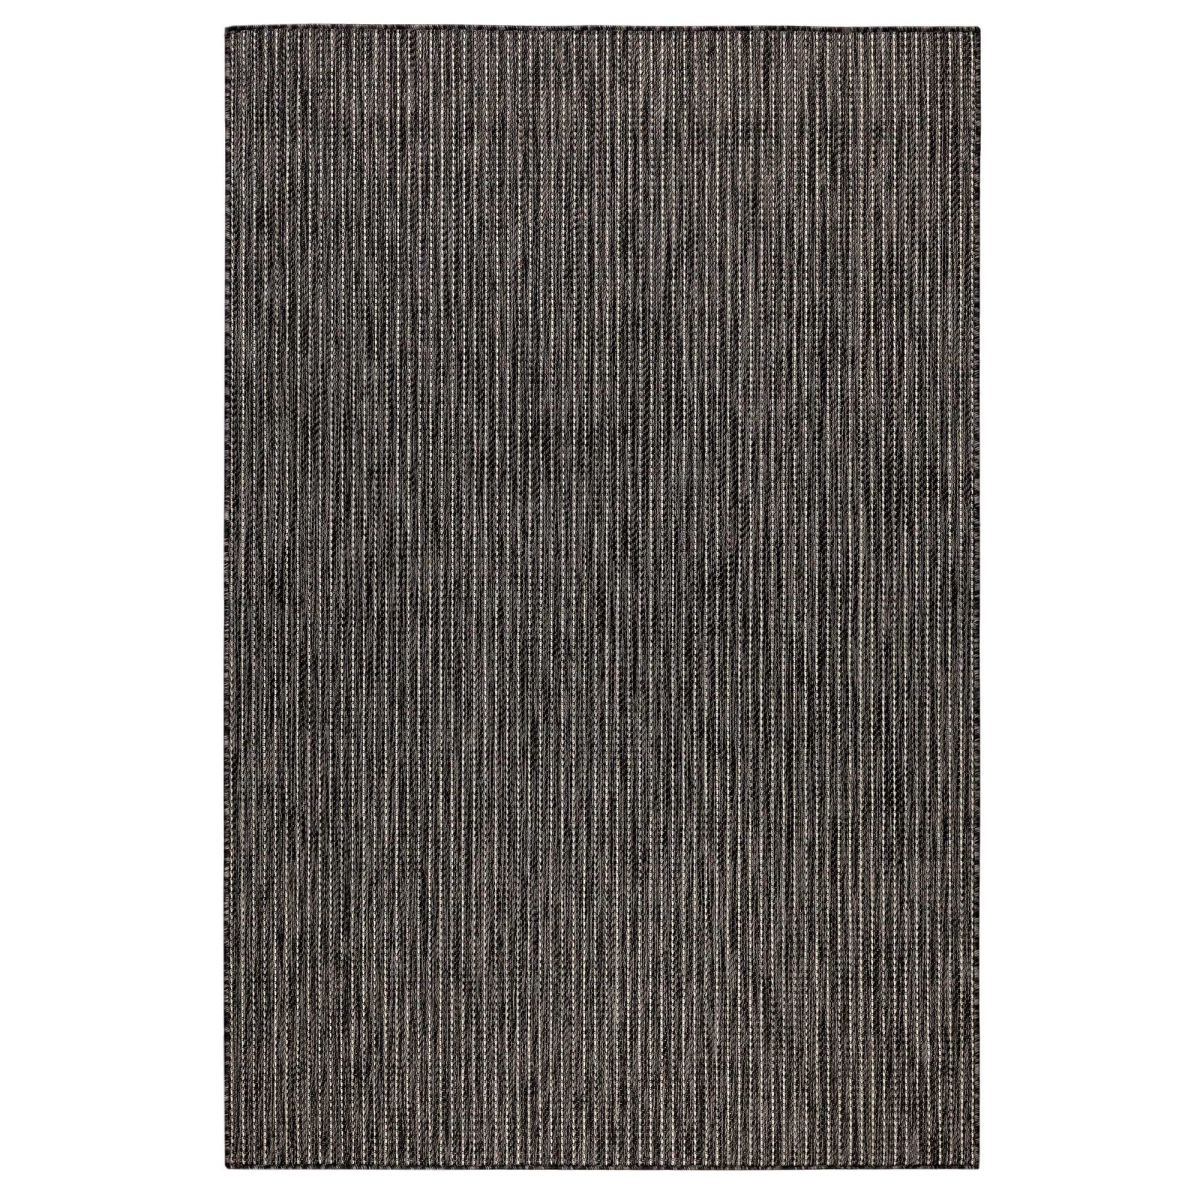 Trans-ocean Imports Cre45842248 39 In. X 59 In. Liora Manne Carmel Texture Stripe Indoor & Outdoor Wilton Woven Rectangle Rug - Black